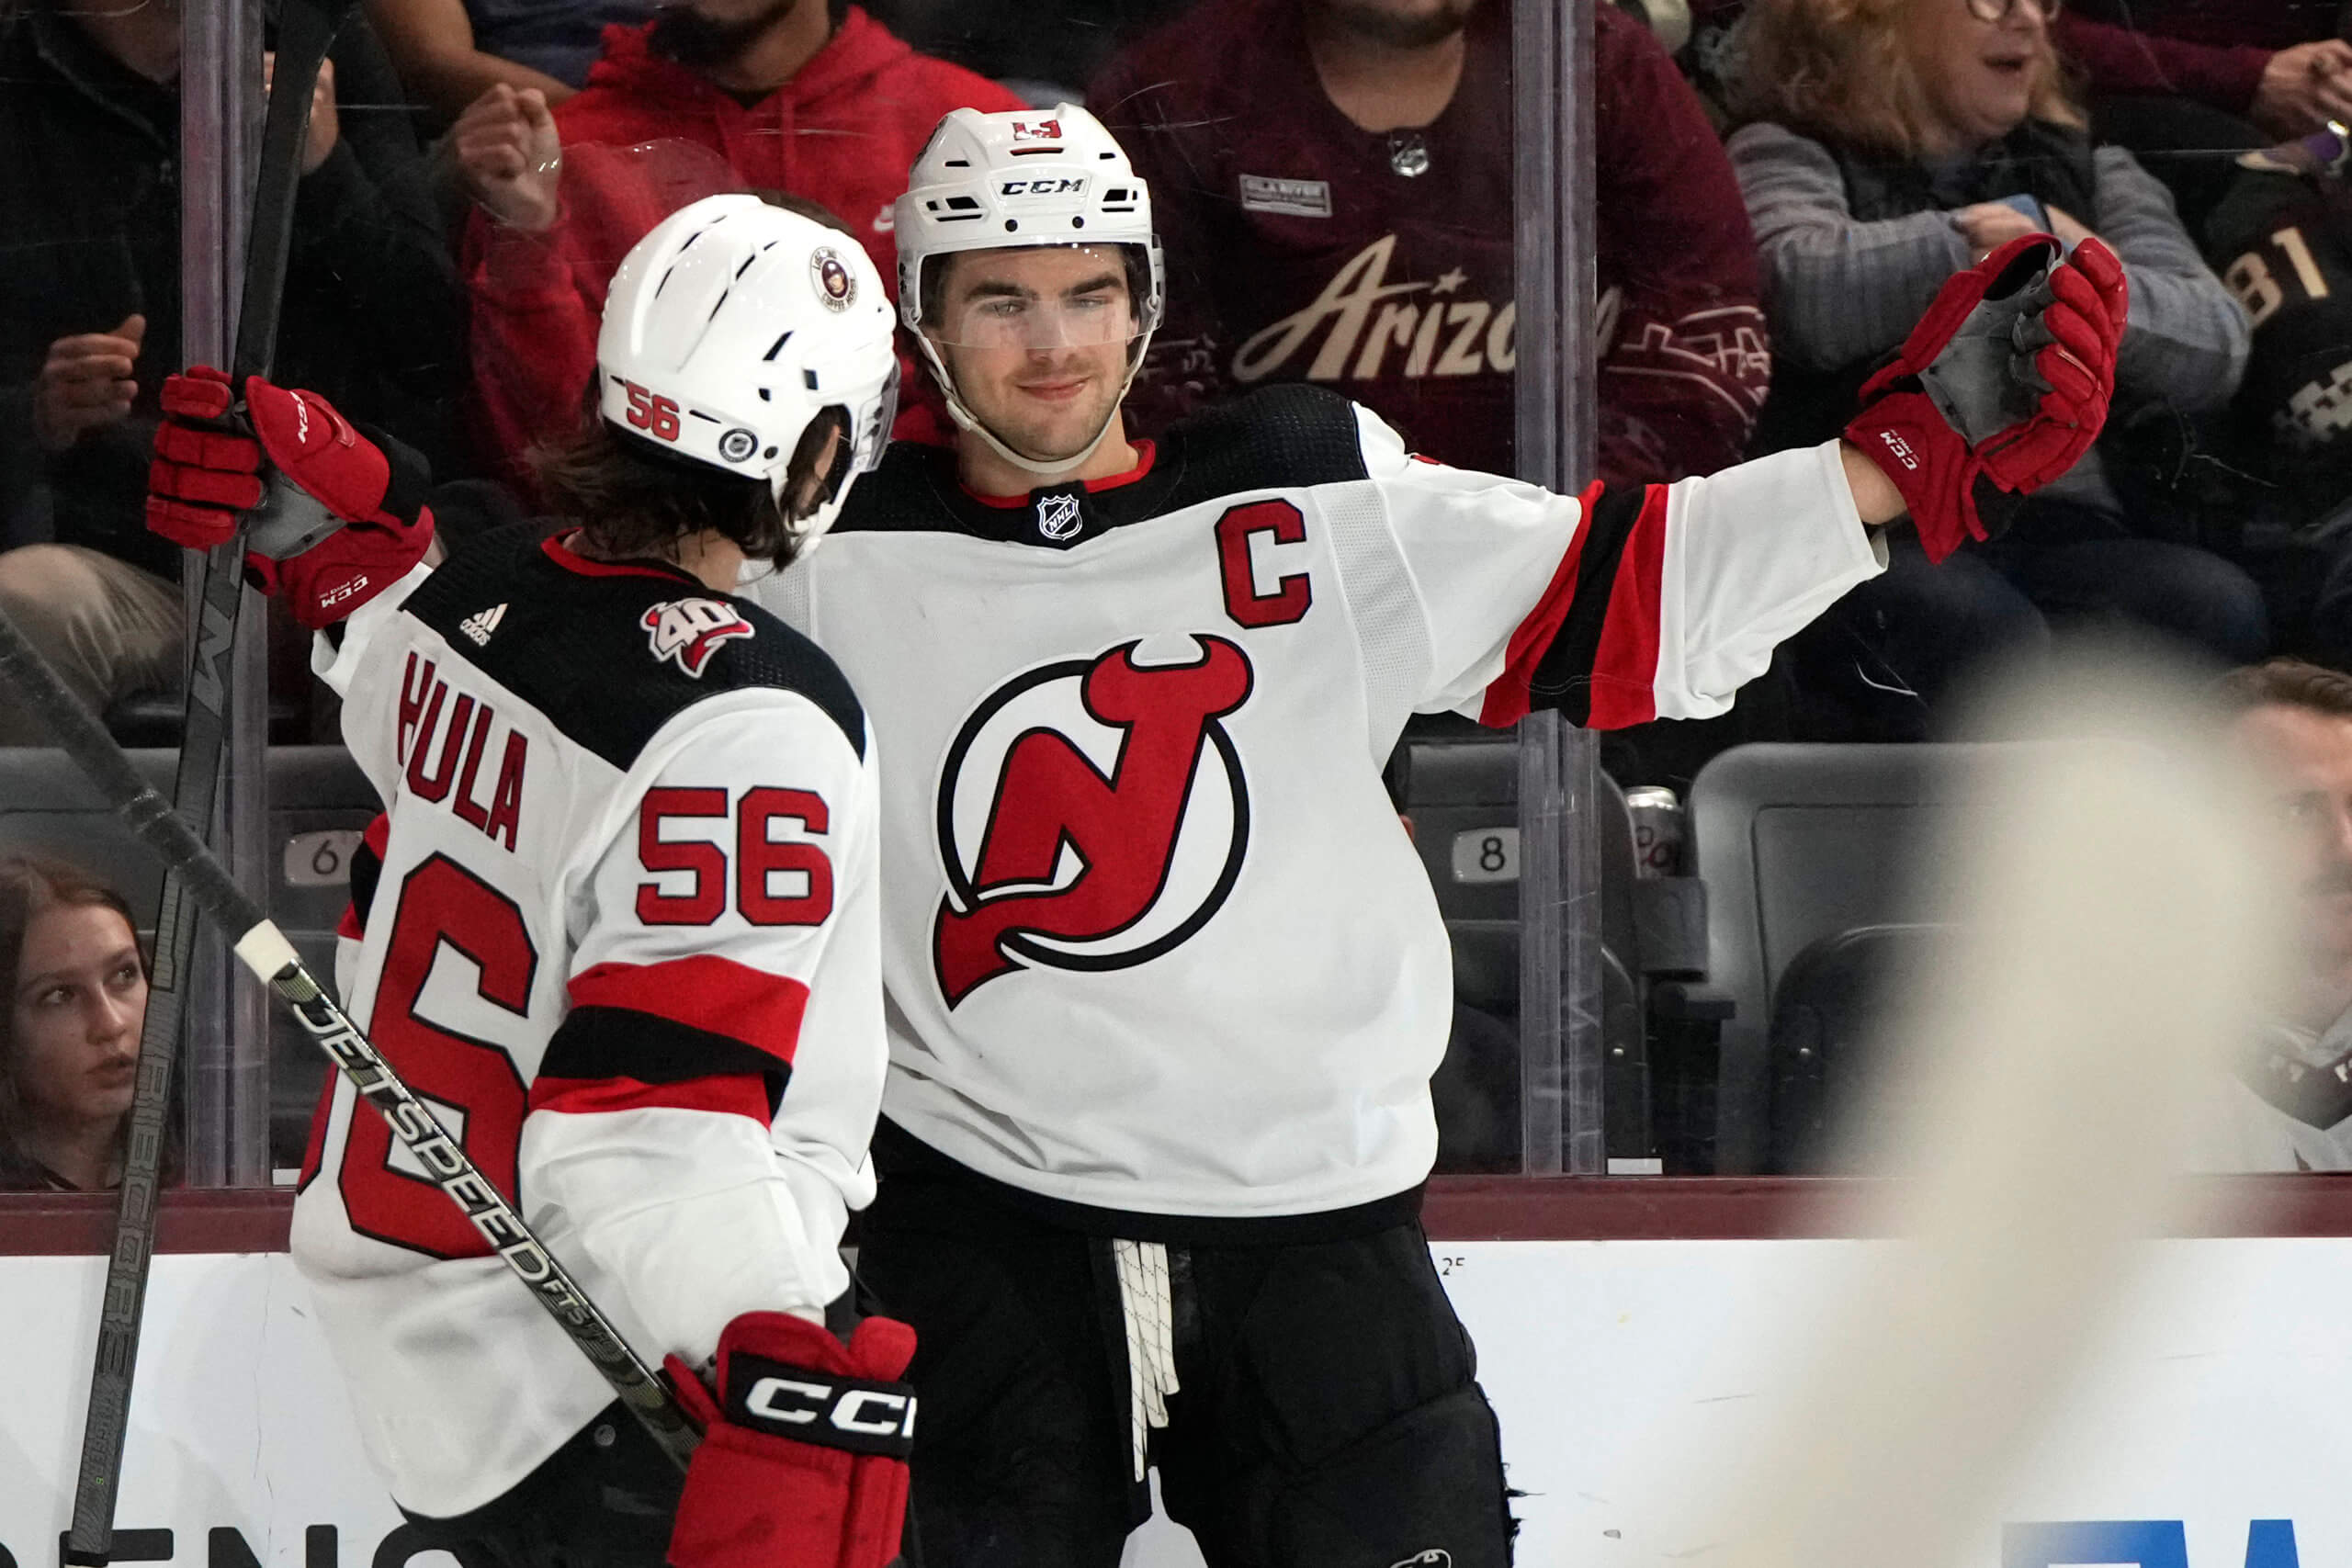 Severson scores in OT, Devils rally to beat Rangers 4-3